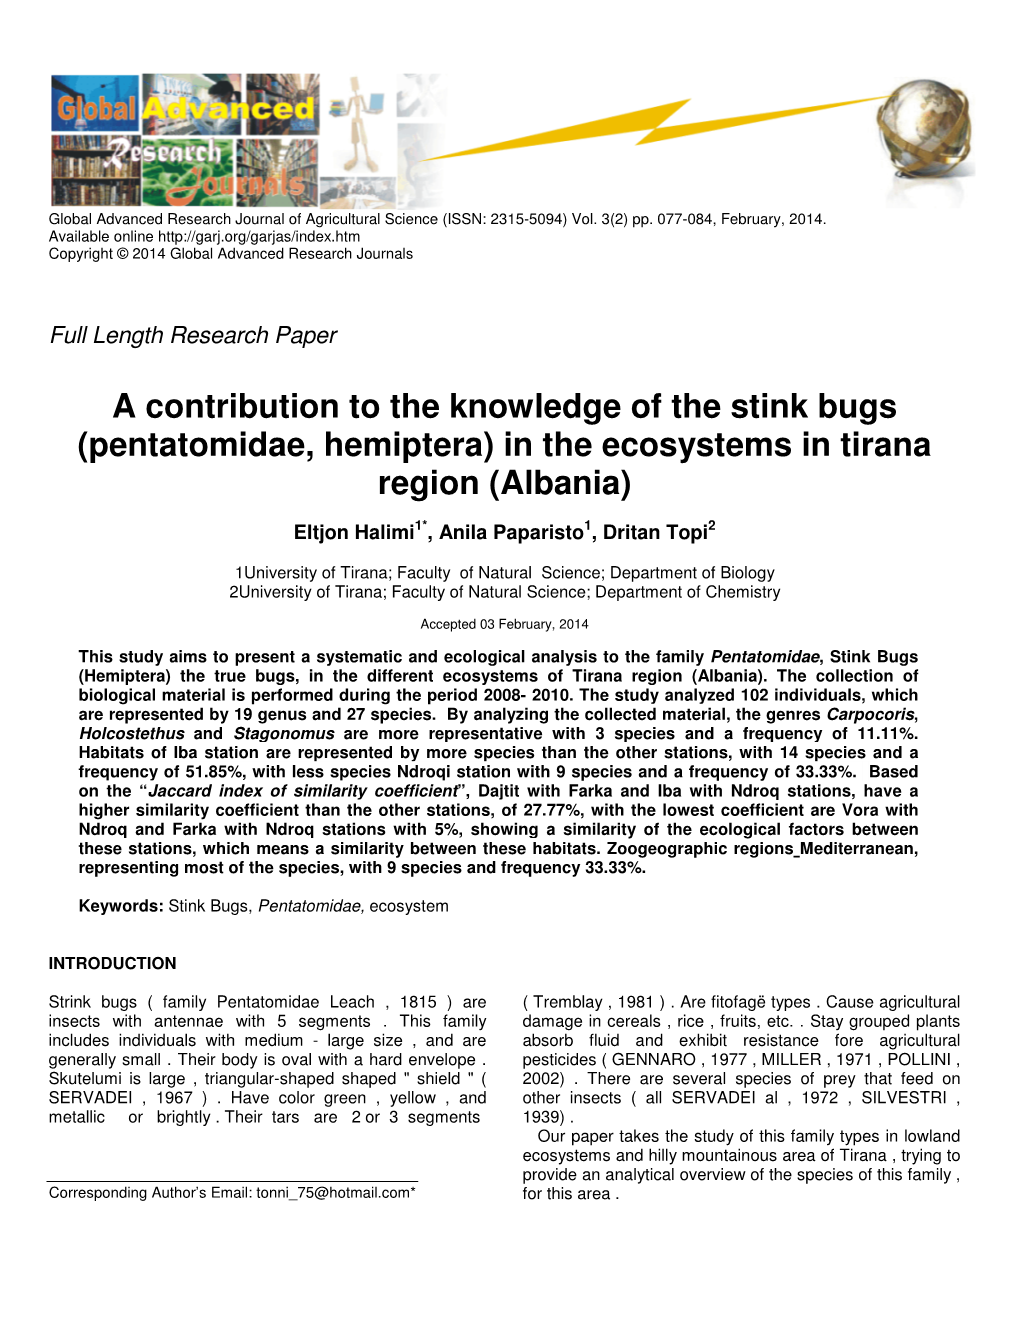 A Contribution to the Knowledge of the Stink Bugs (Pentatomidae, Hemiptera) in the Ecosystems in Tirana Region (Albania)